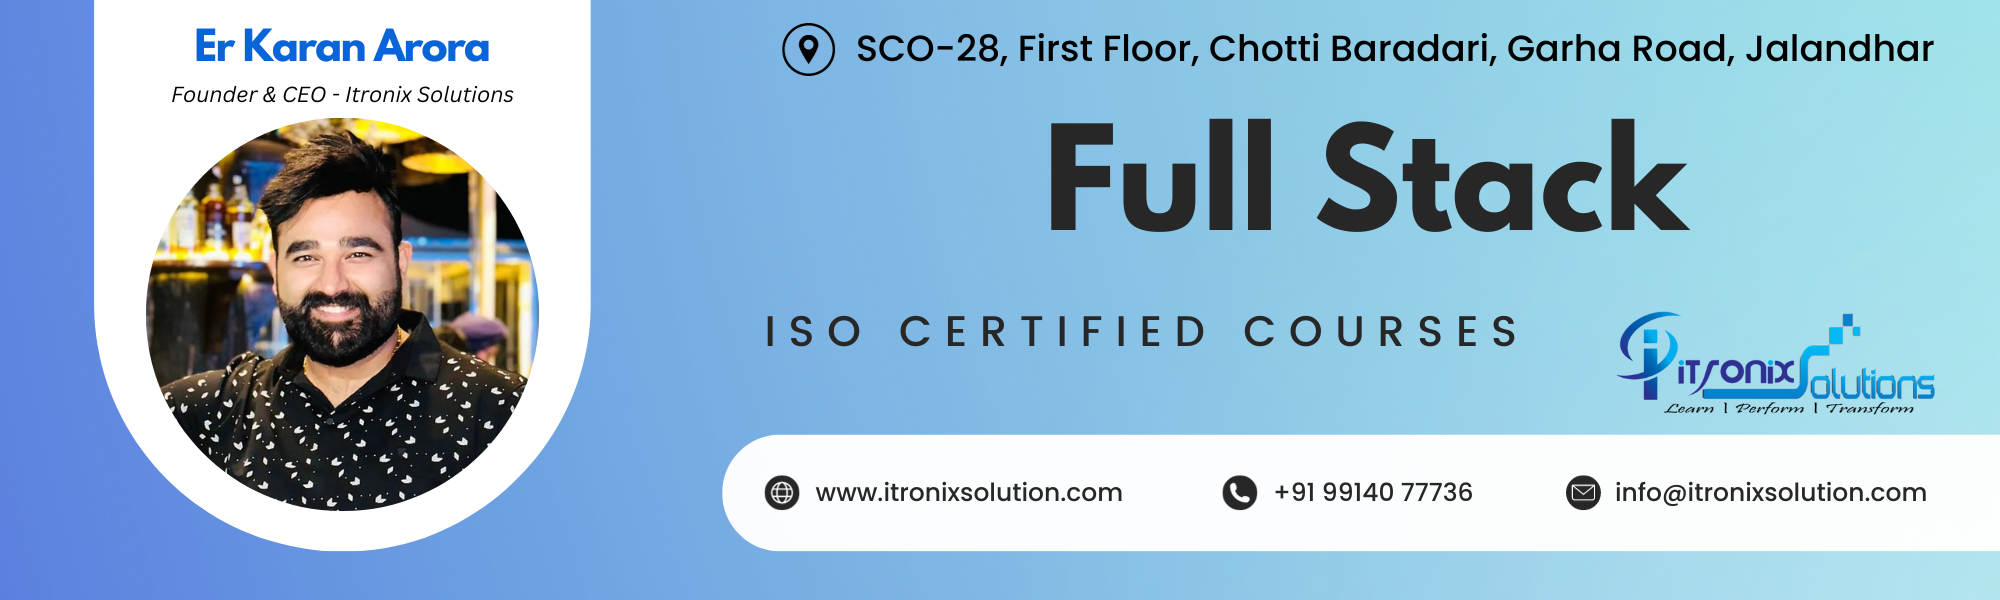 Full Stack Course in Jalandhar - ITRONIX SOLUTIONS